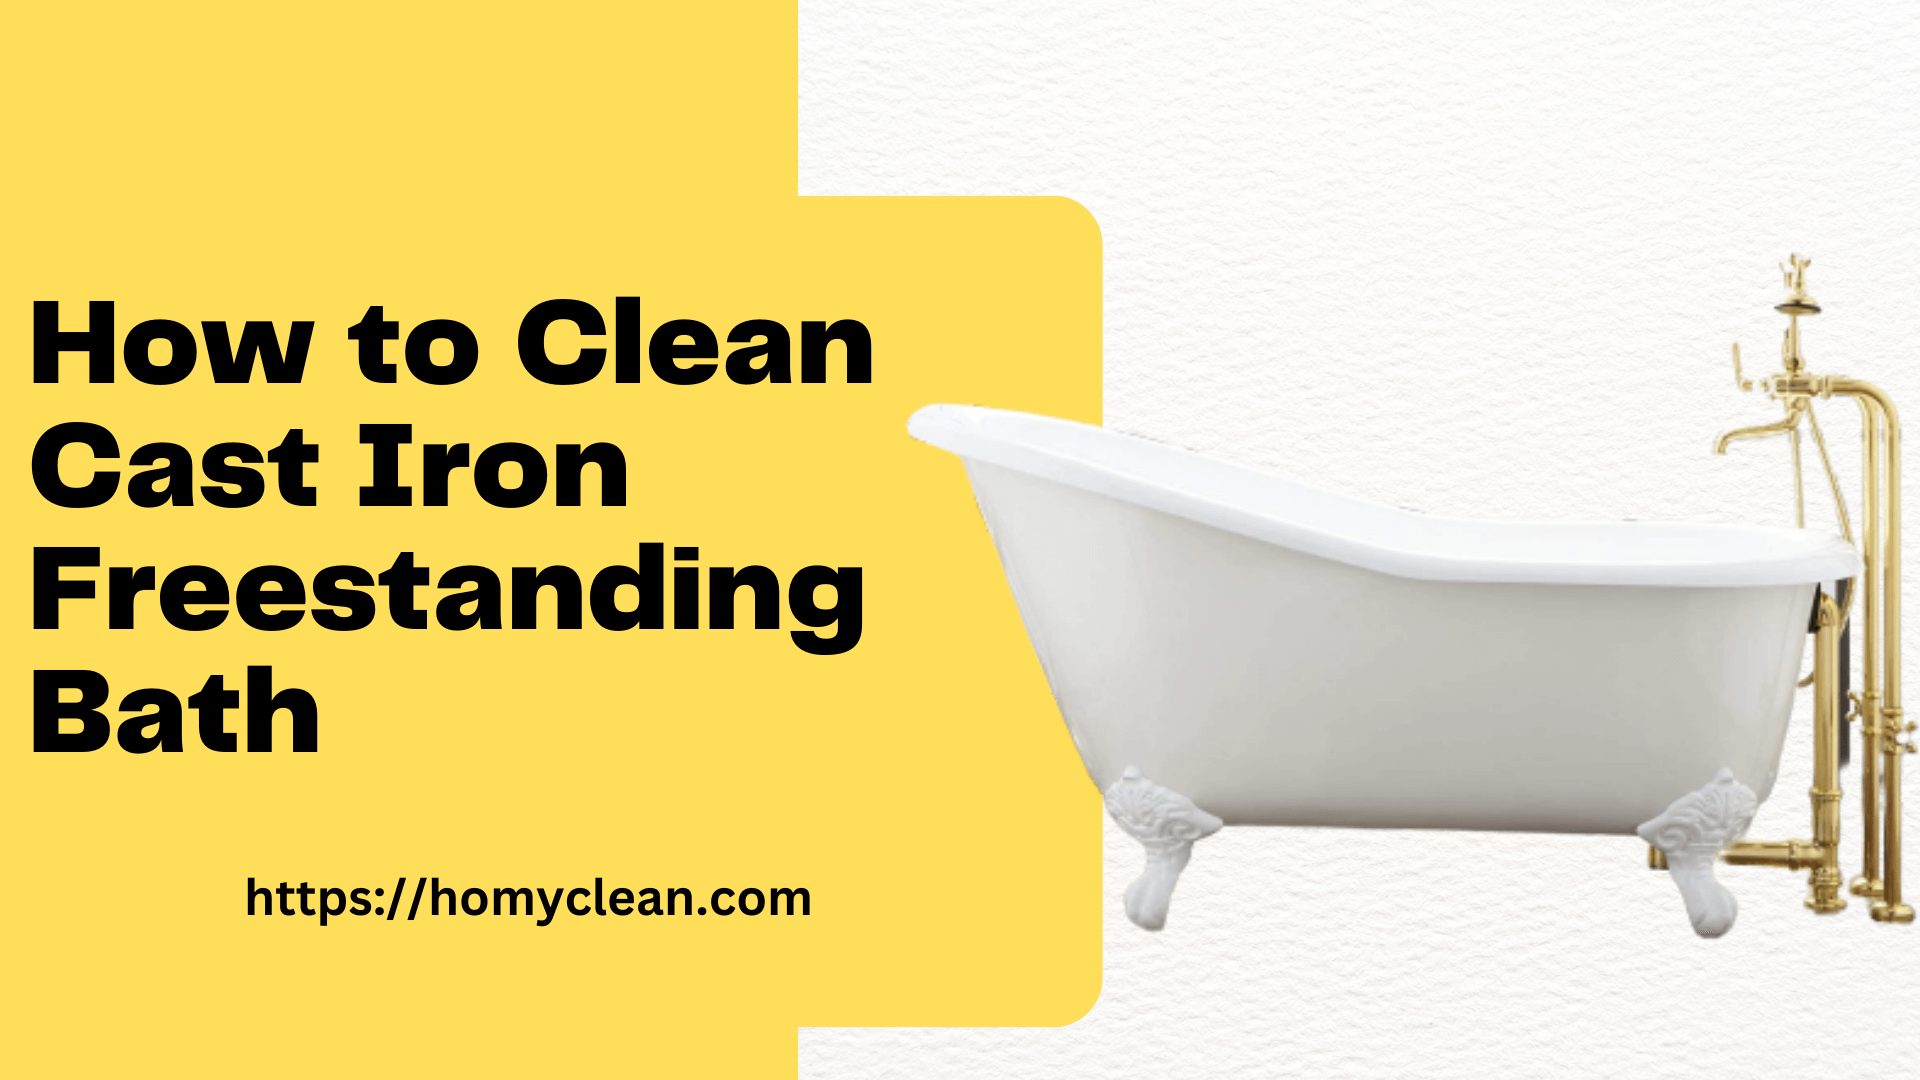 How to Clean Cast Iron Freestanding Bath